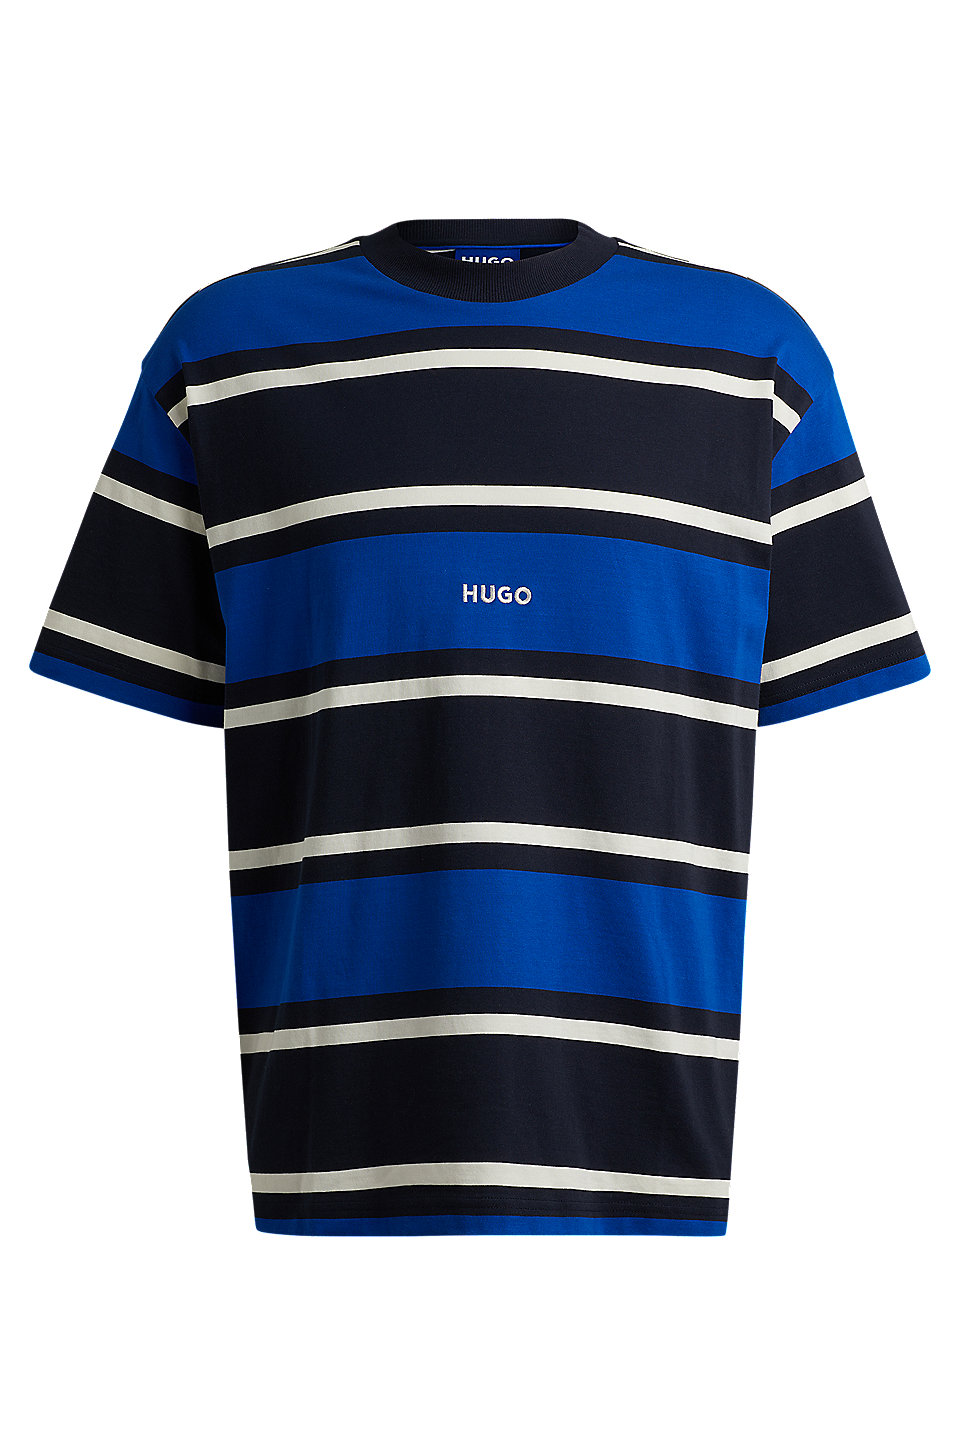 HUGO - Striped T-shirt in cotton jersey with embroidered logo